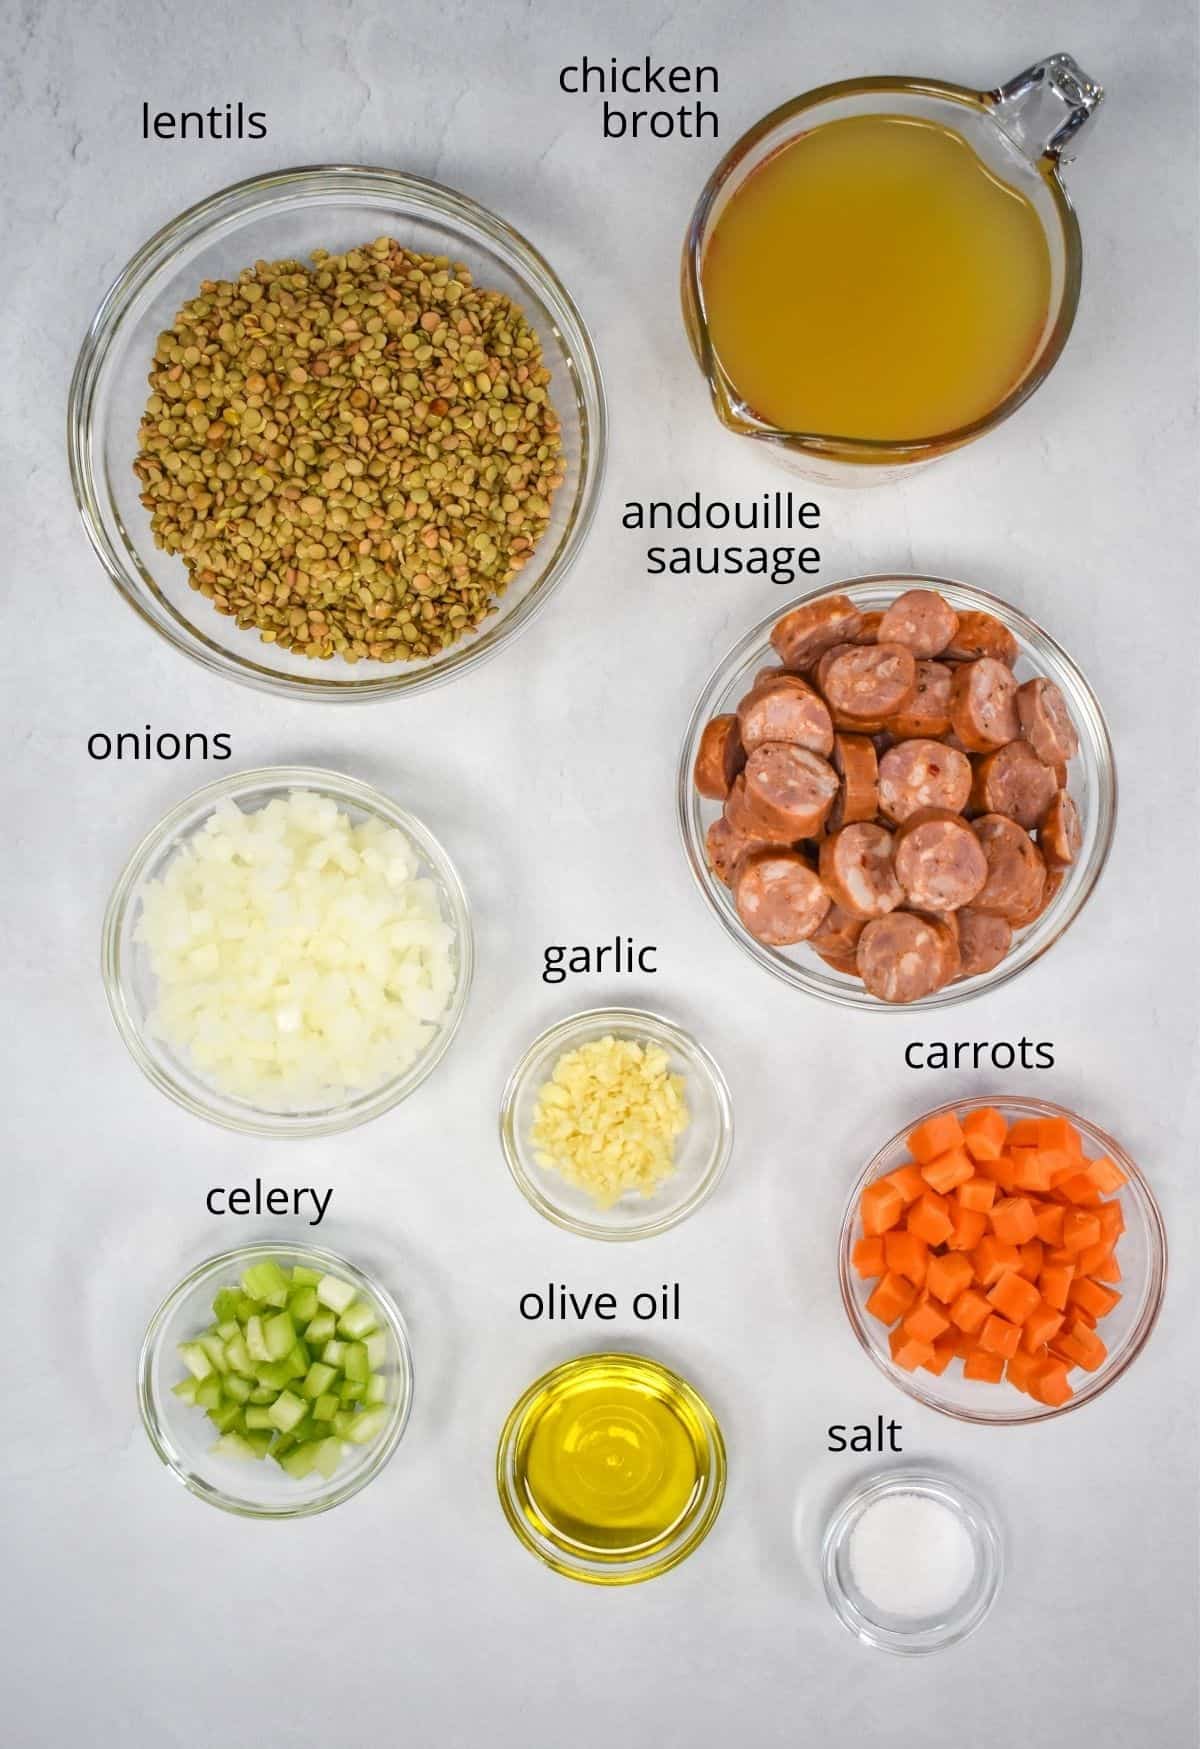 An image of the ingredients for the soup, prepped and arranged in glass bowls on a white table.